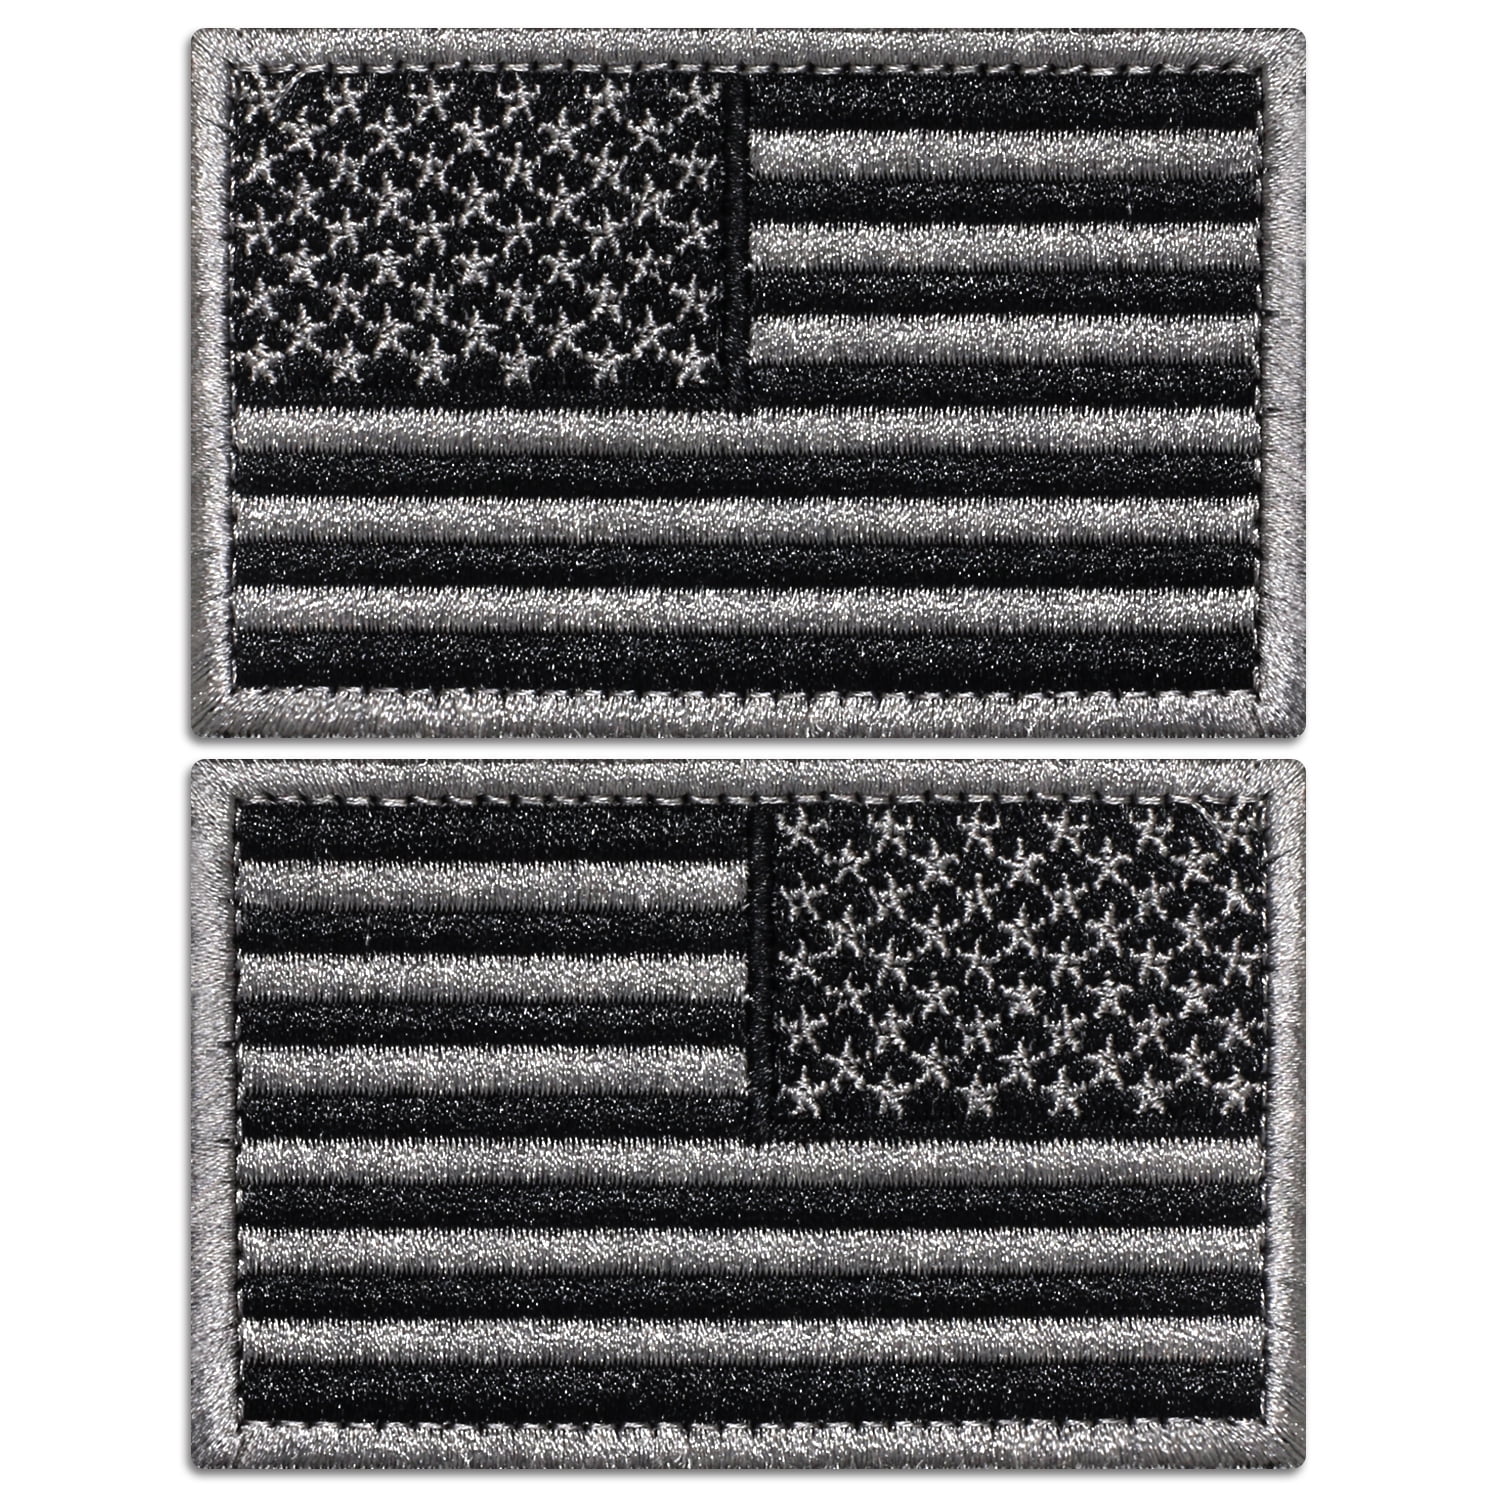 2 USA Flag arid Multicam Color 1"x2" Morale Patch W/ sew in hook on the back 